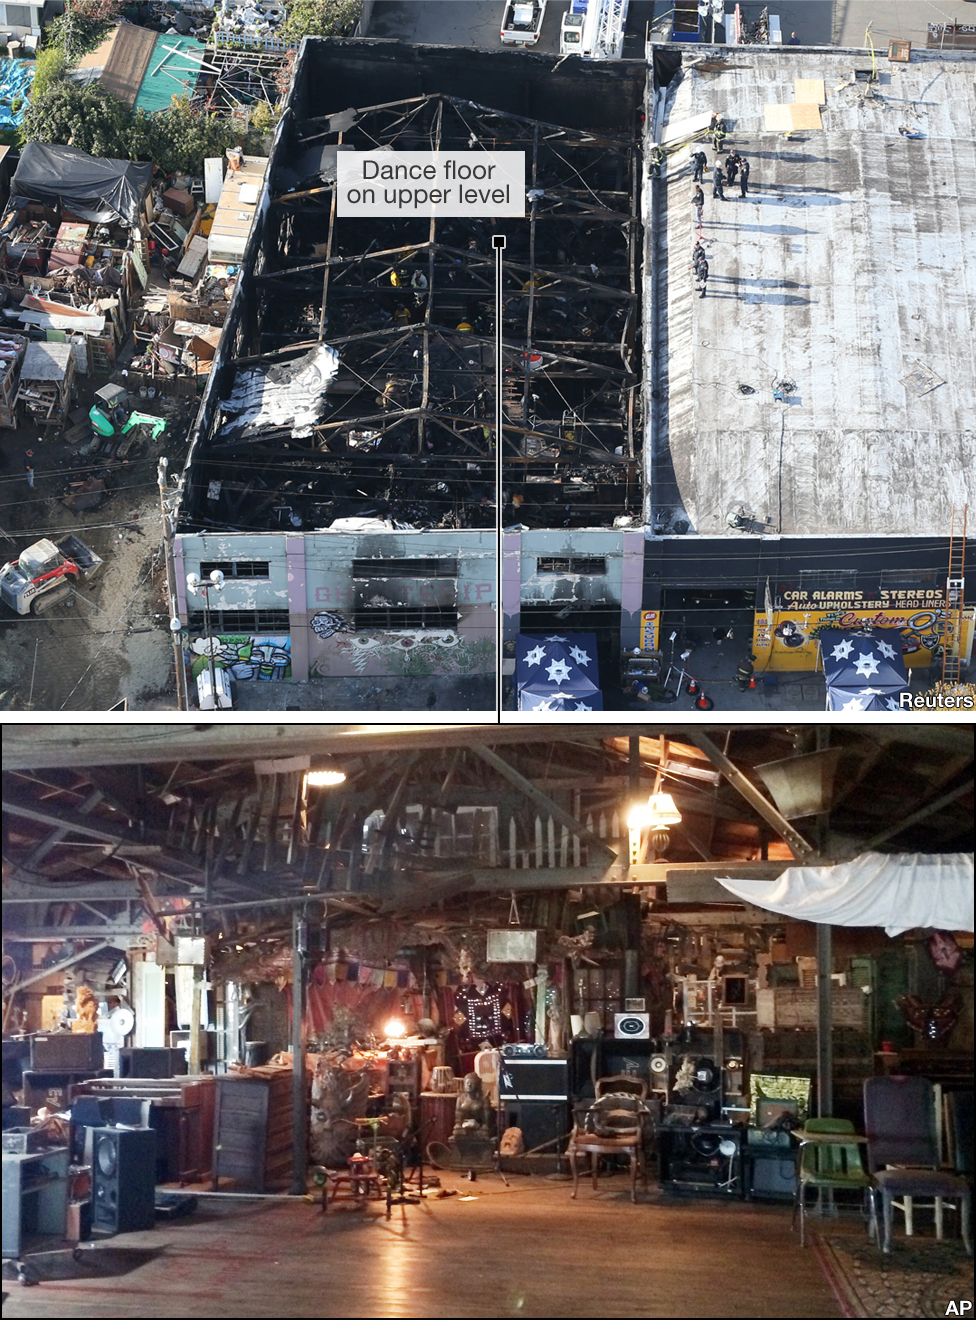 Aerial image of the burnt out venue and a photo of the interior before the fire